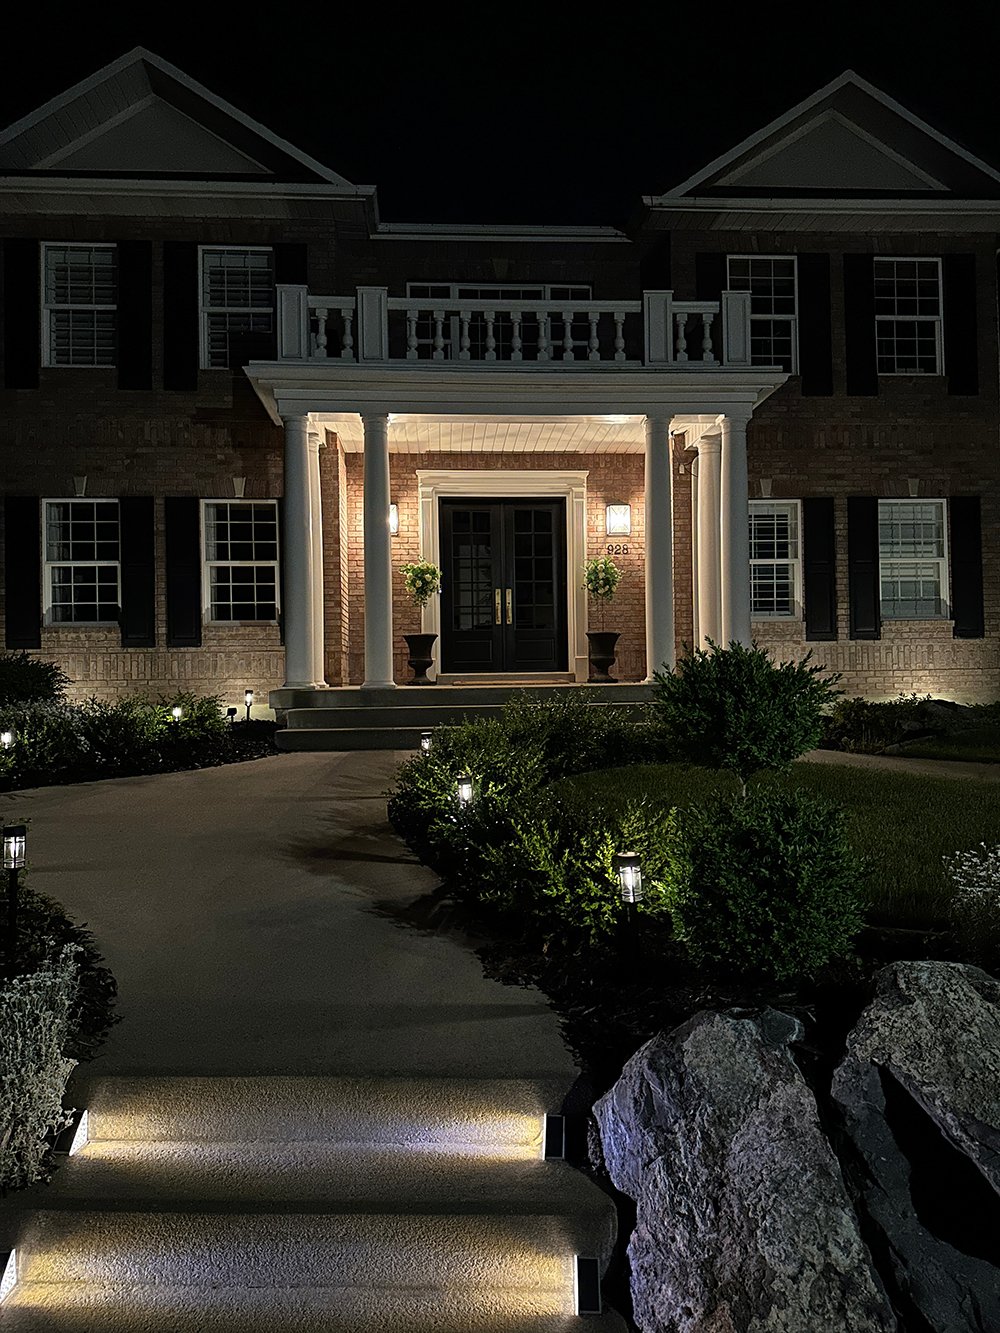 Where to Install Outdoor DIY Solar Landscape Lighting - roomfortuesday.com